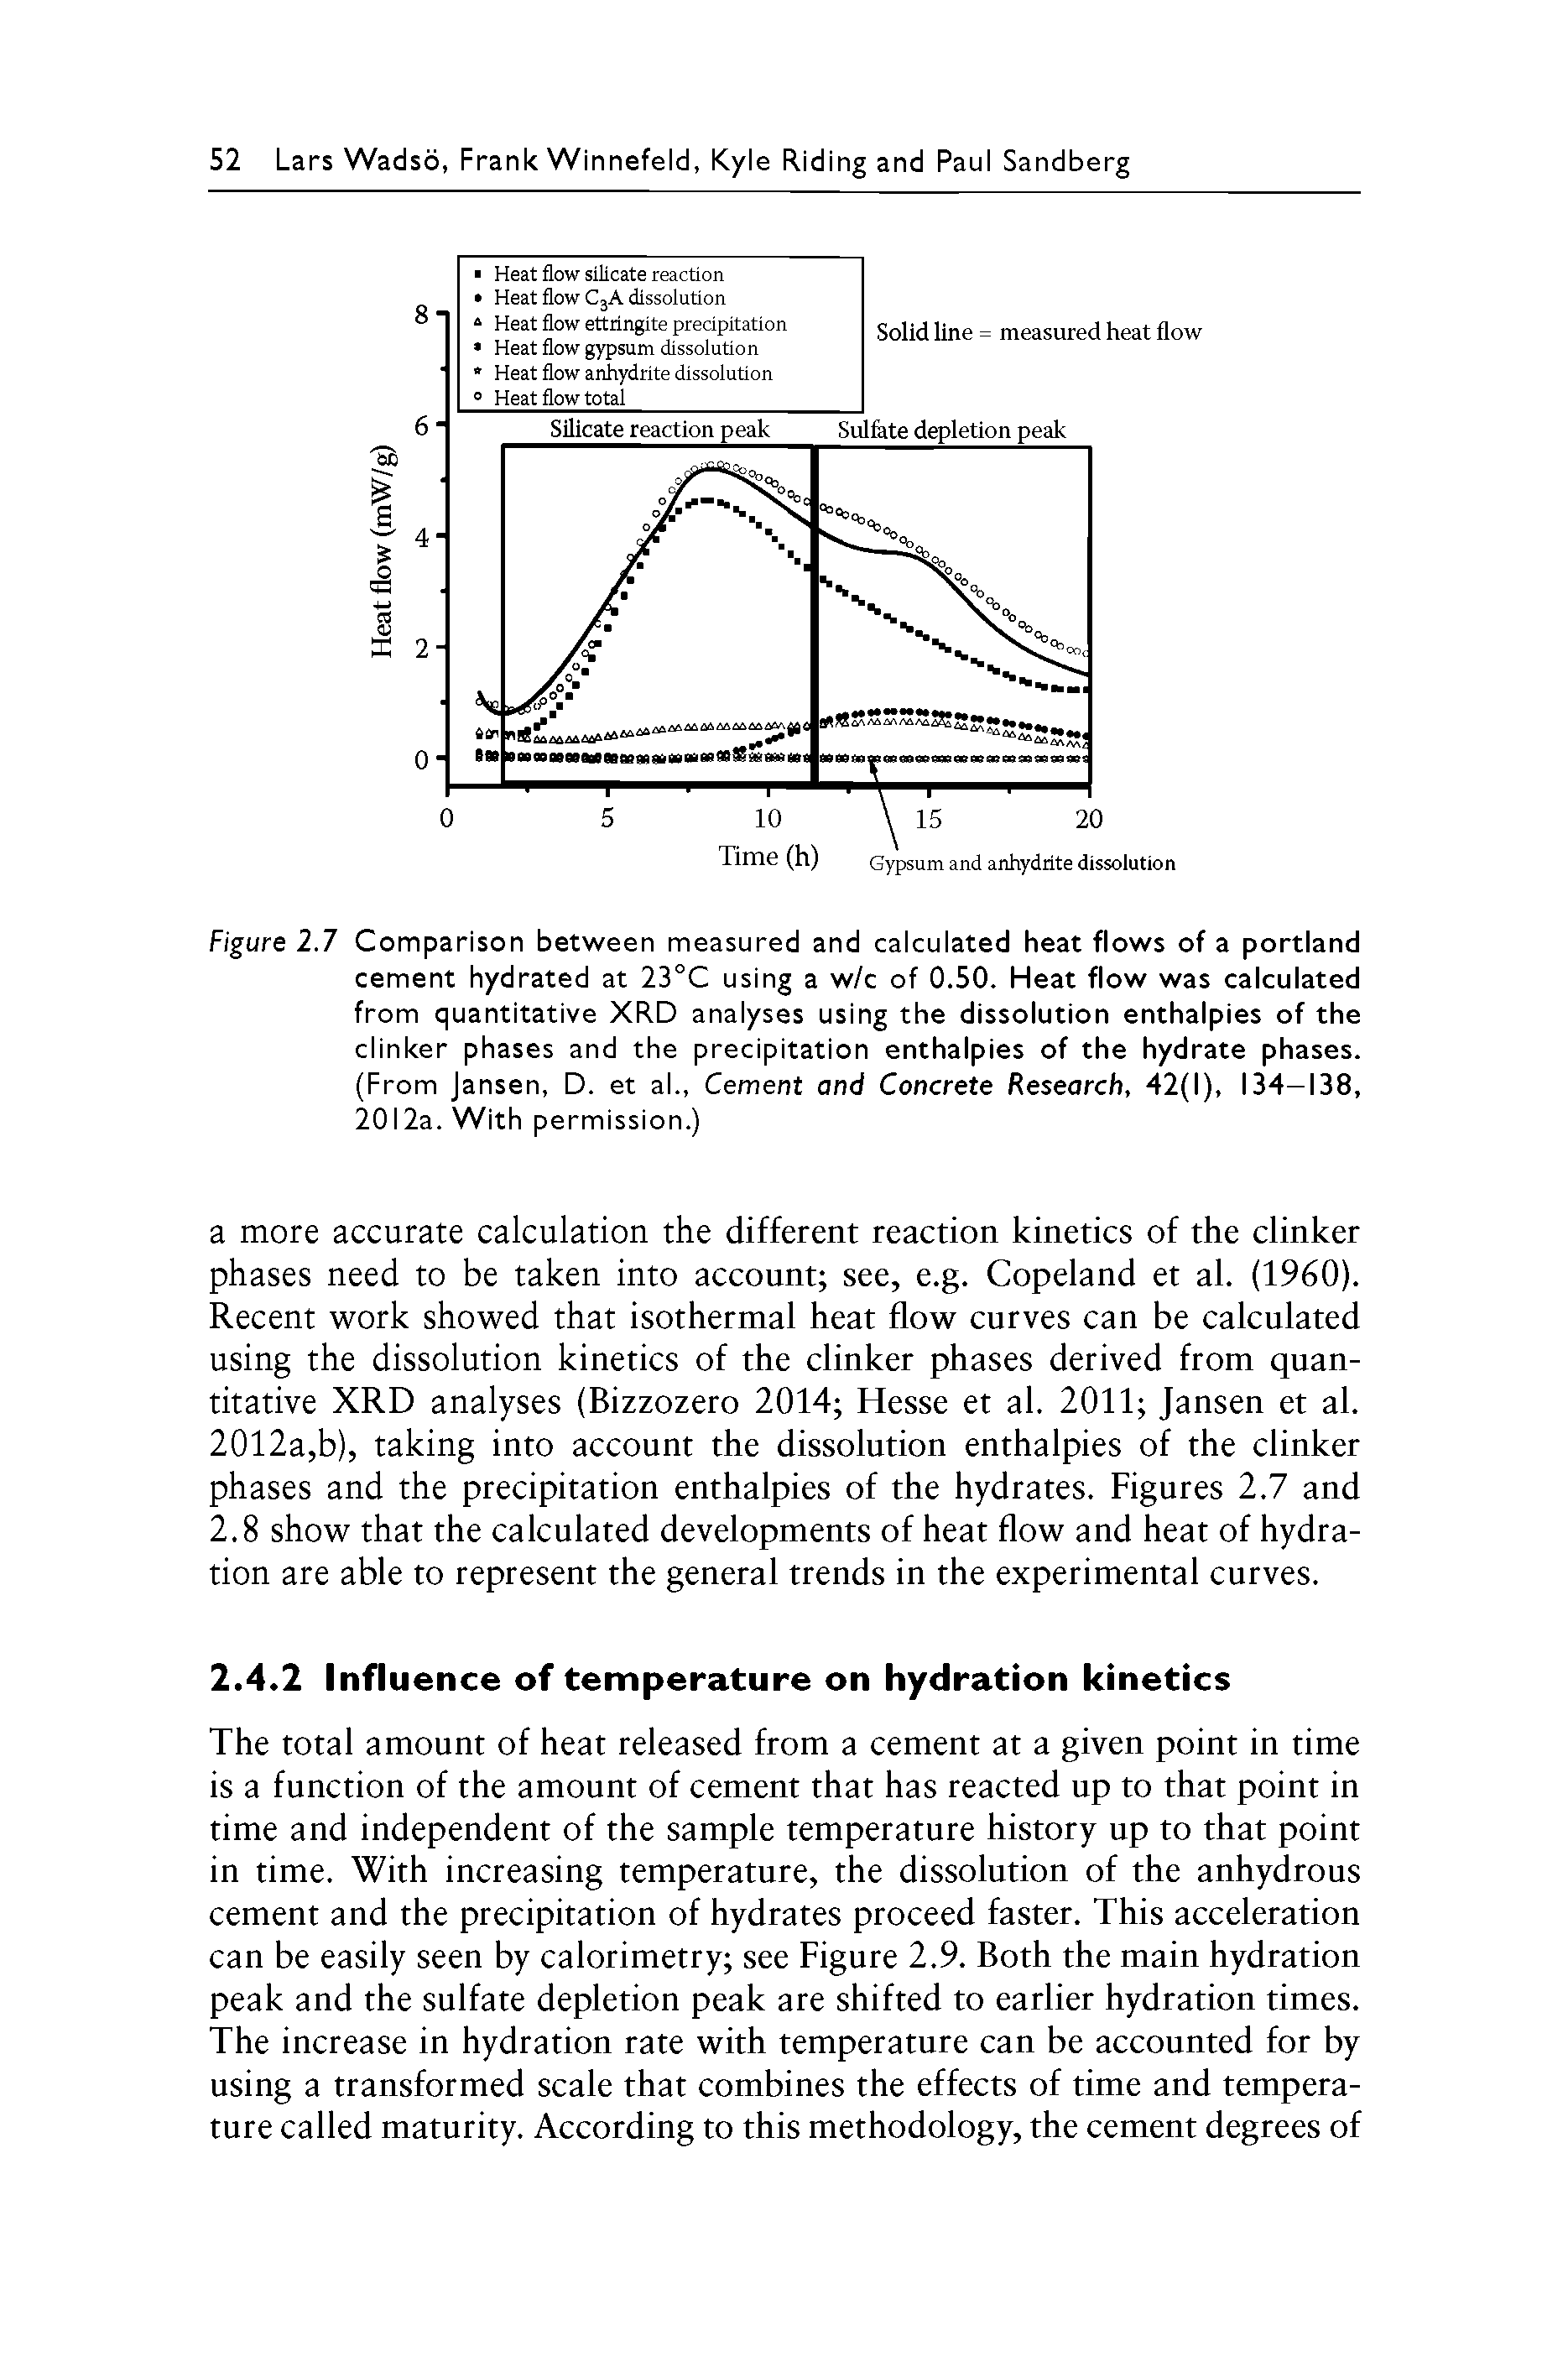 Figure 2.7 Comparison between measured and calculated heat flows of a portland cement hydrated at 23°C using a w/c of 0.50. Heat flow was calculated from quantitative XRD anaiyses using the dissolution enthalpies of the clinker phases and the precipitation enthalpies of the hydrate phases. (From Jansen, D. et al., Cement and Concrete Research, 42(1), 134-138, 2012a. With permission.)...